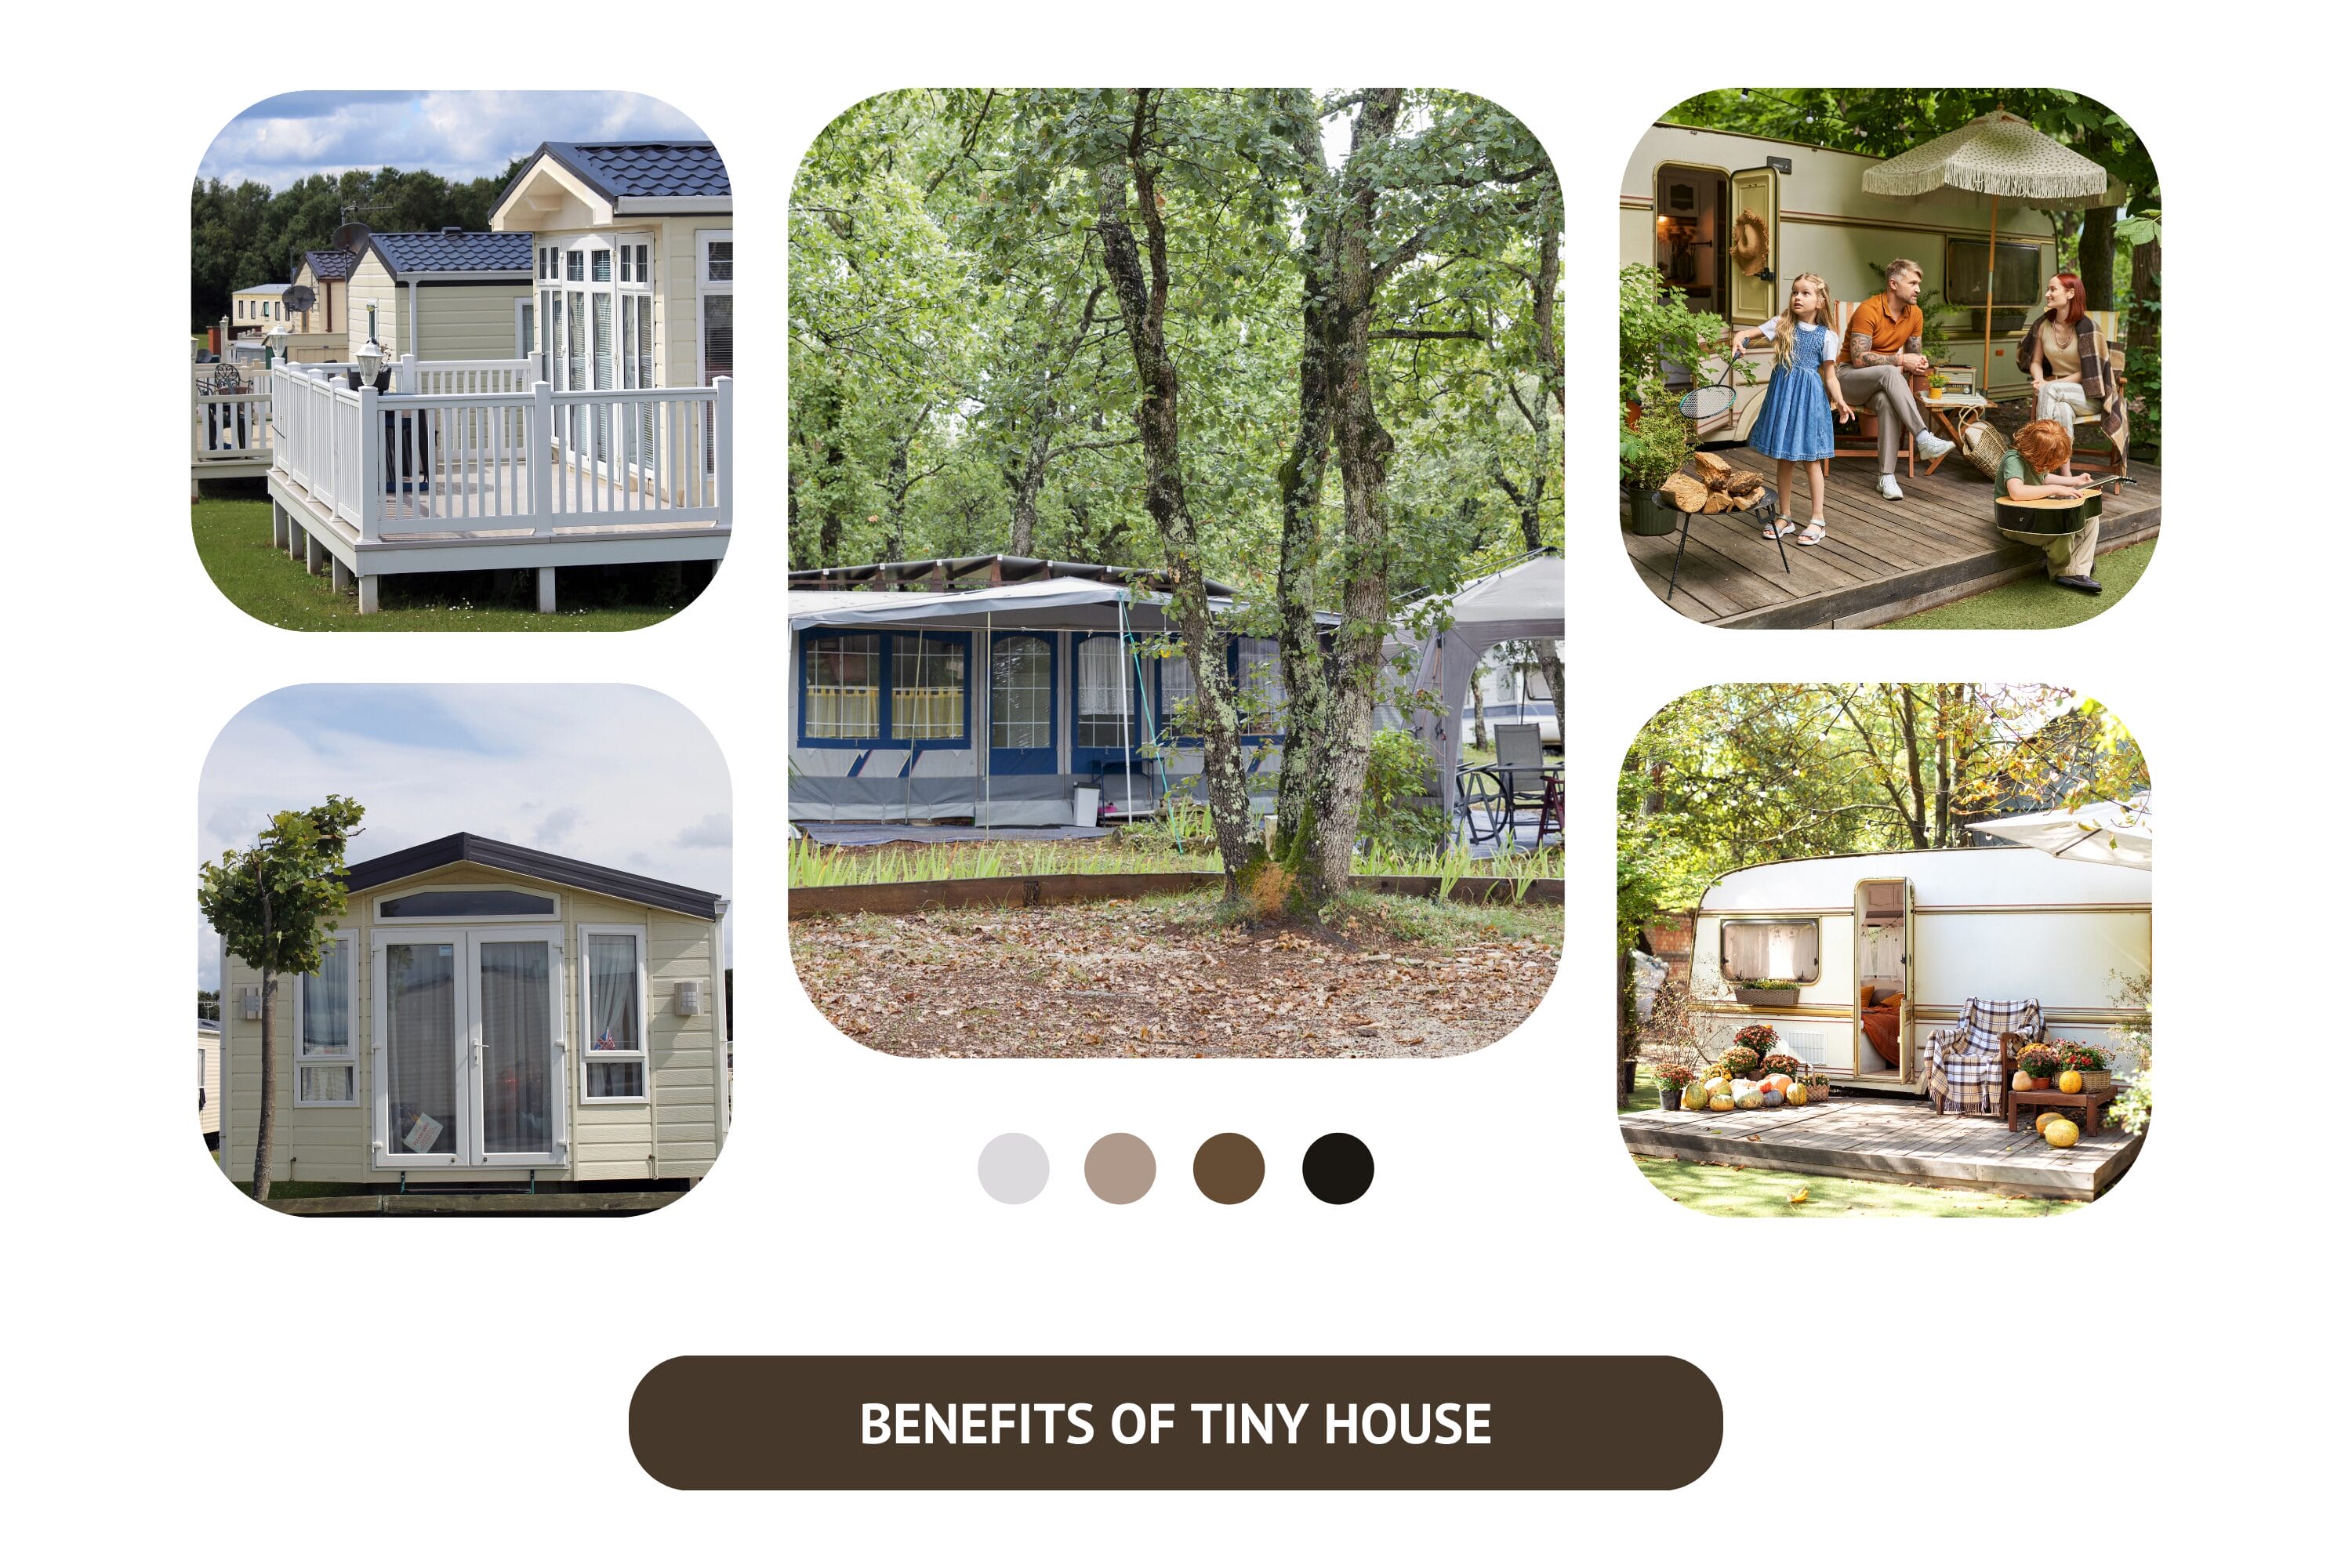 The advantages of living in a tiny house are numerous and significant.